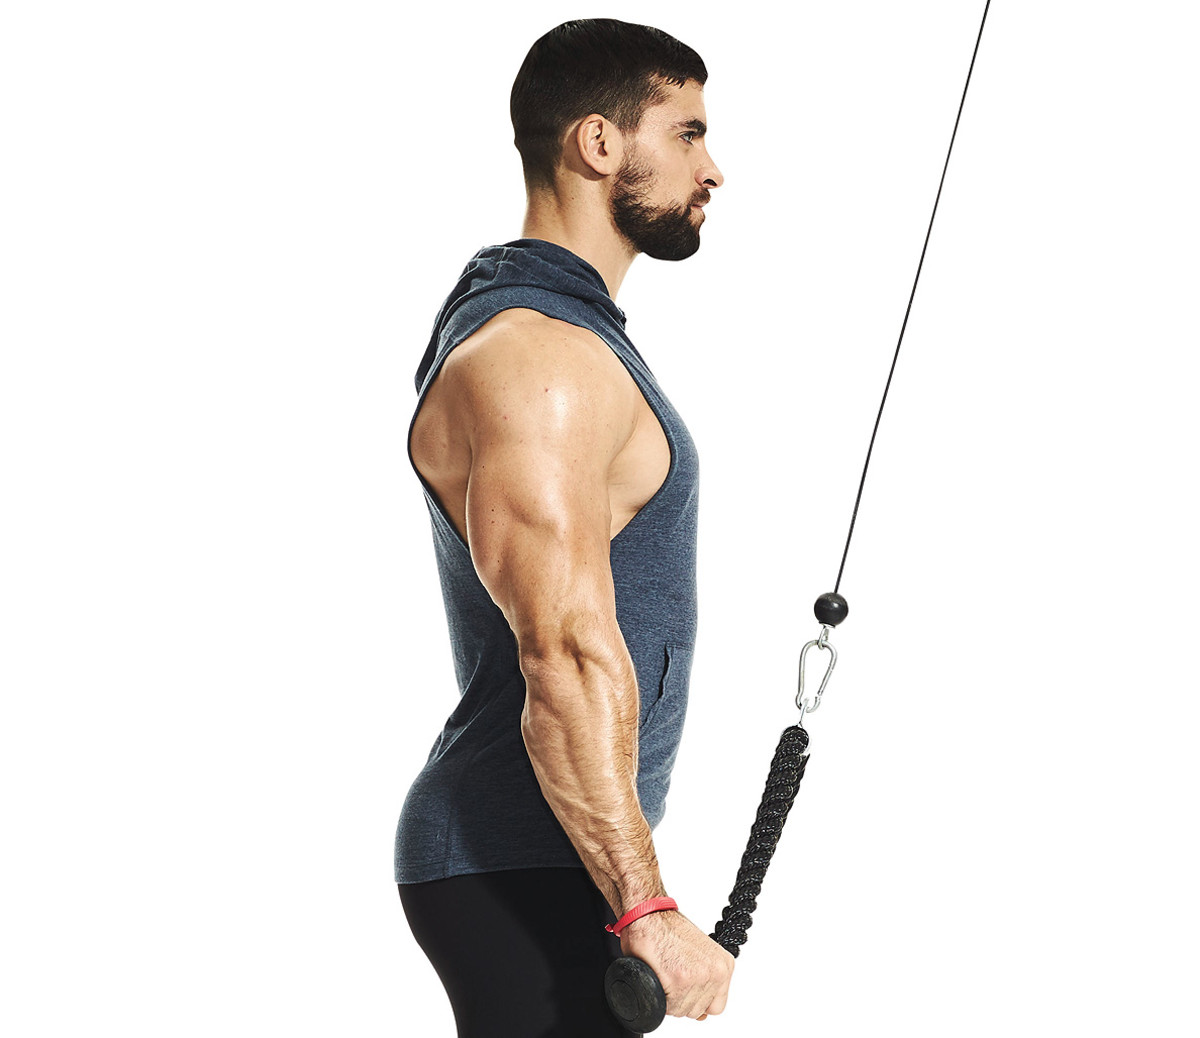 Workout Finisher: The triceps exercises to triple your size